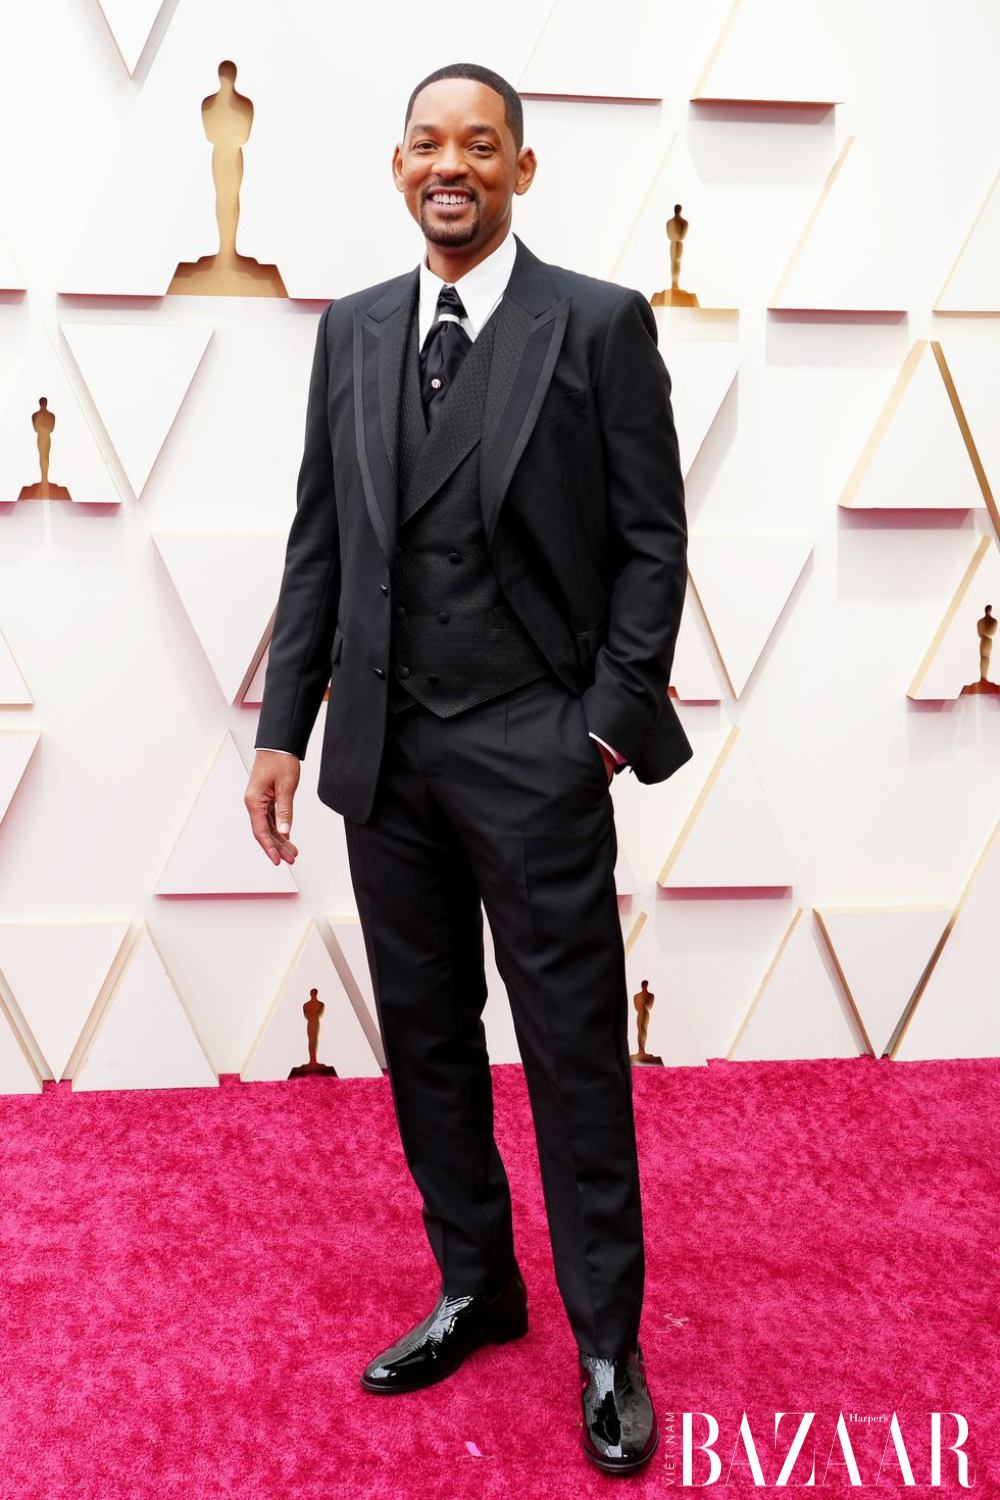 Will-Smith-BZ-thoi-trang-tham-do-Oscar-2022-red-carpet-best-looks